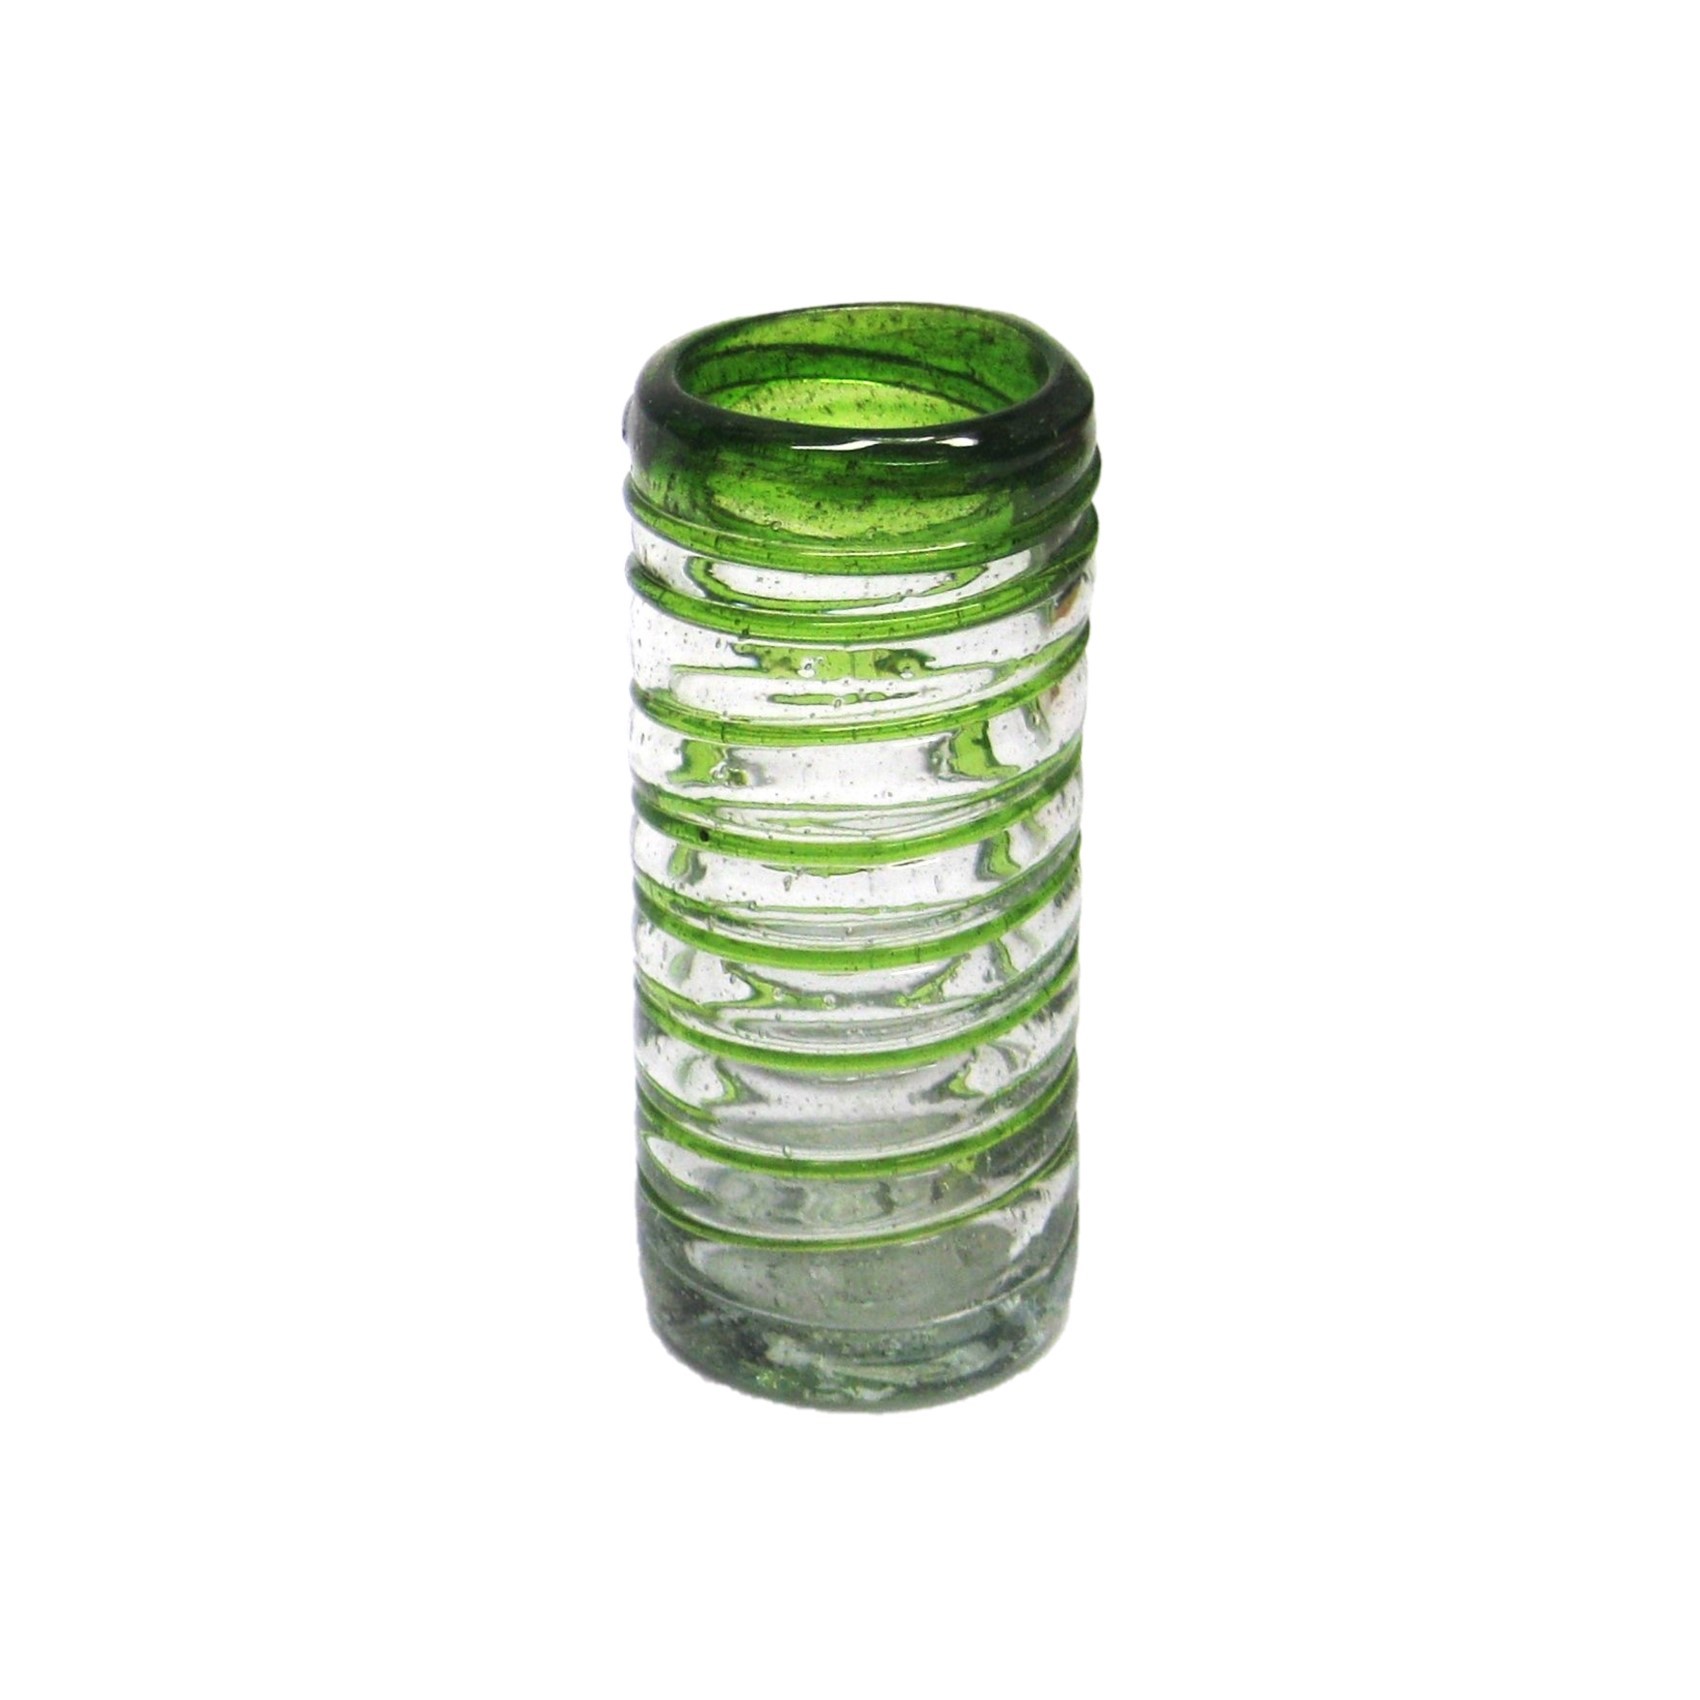 Wholesale MEXICAN GLASSWARE / Emerald Green Spiral 2 oz Tequila Shot Glasses  / Emerald green threads spinned to embrace these gorgeous shot glasses, perfect for parties or enjoying your favorite liquor.